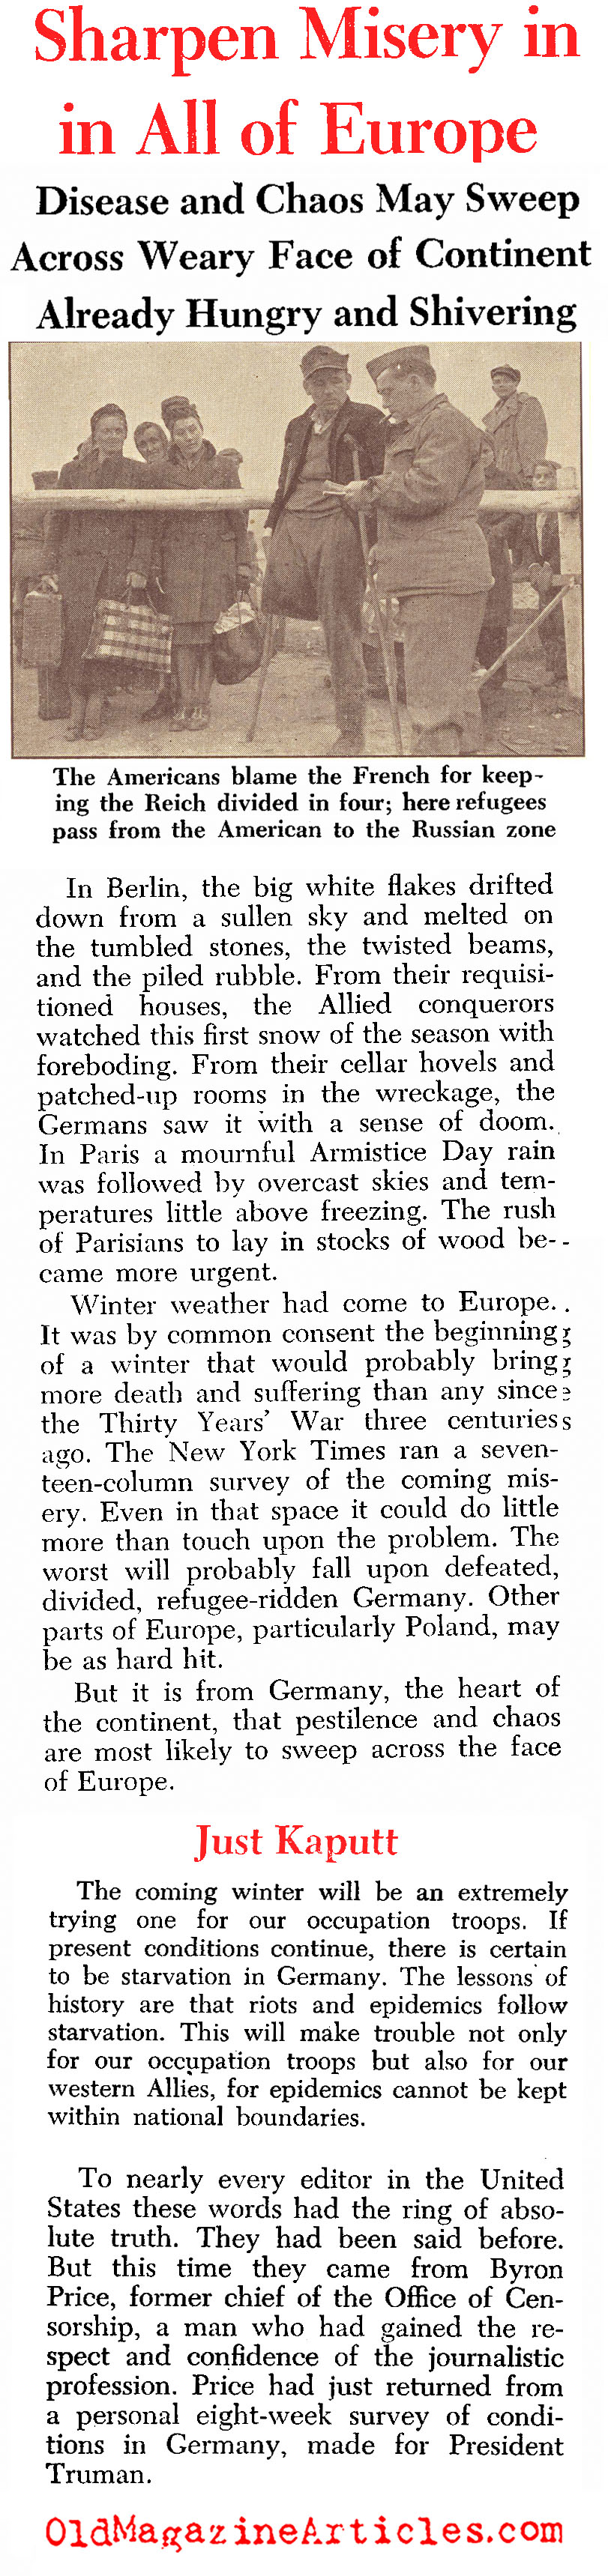 The First Winter of the Peace (Newsweek Magazine, 1945)